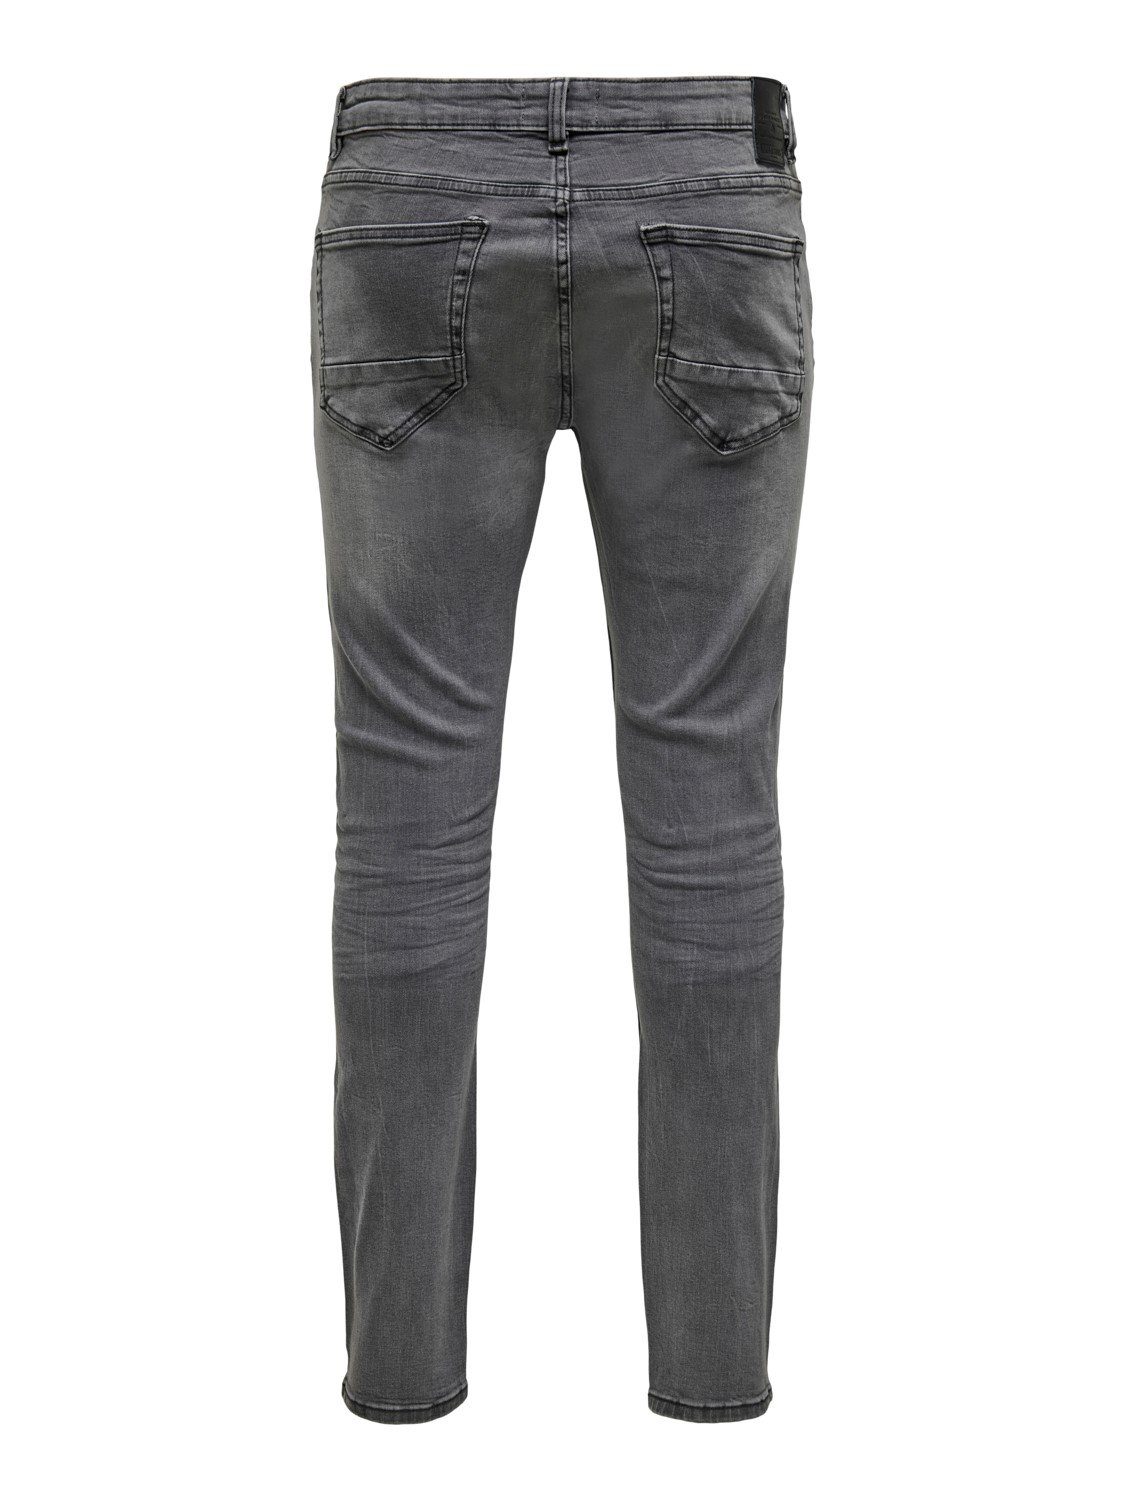 ONLY & SONS Slim-fit-Jeans Skinny Pants Hose Stoned 3977 Fit Grau ONSWARP (1-tlg) Denim in Jeans Basic Washed